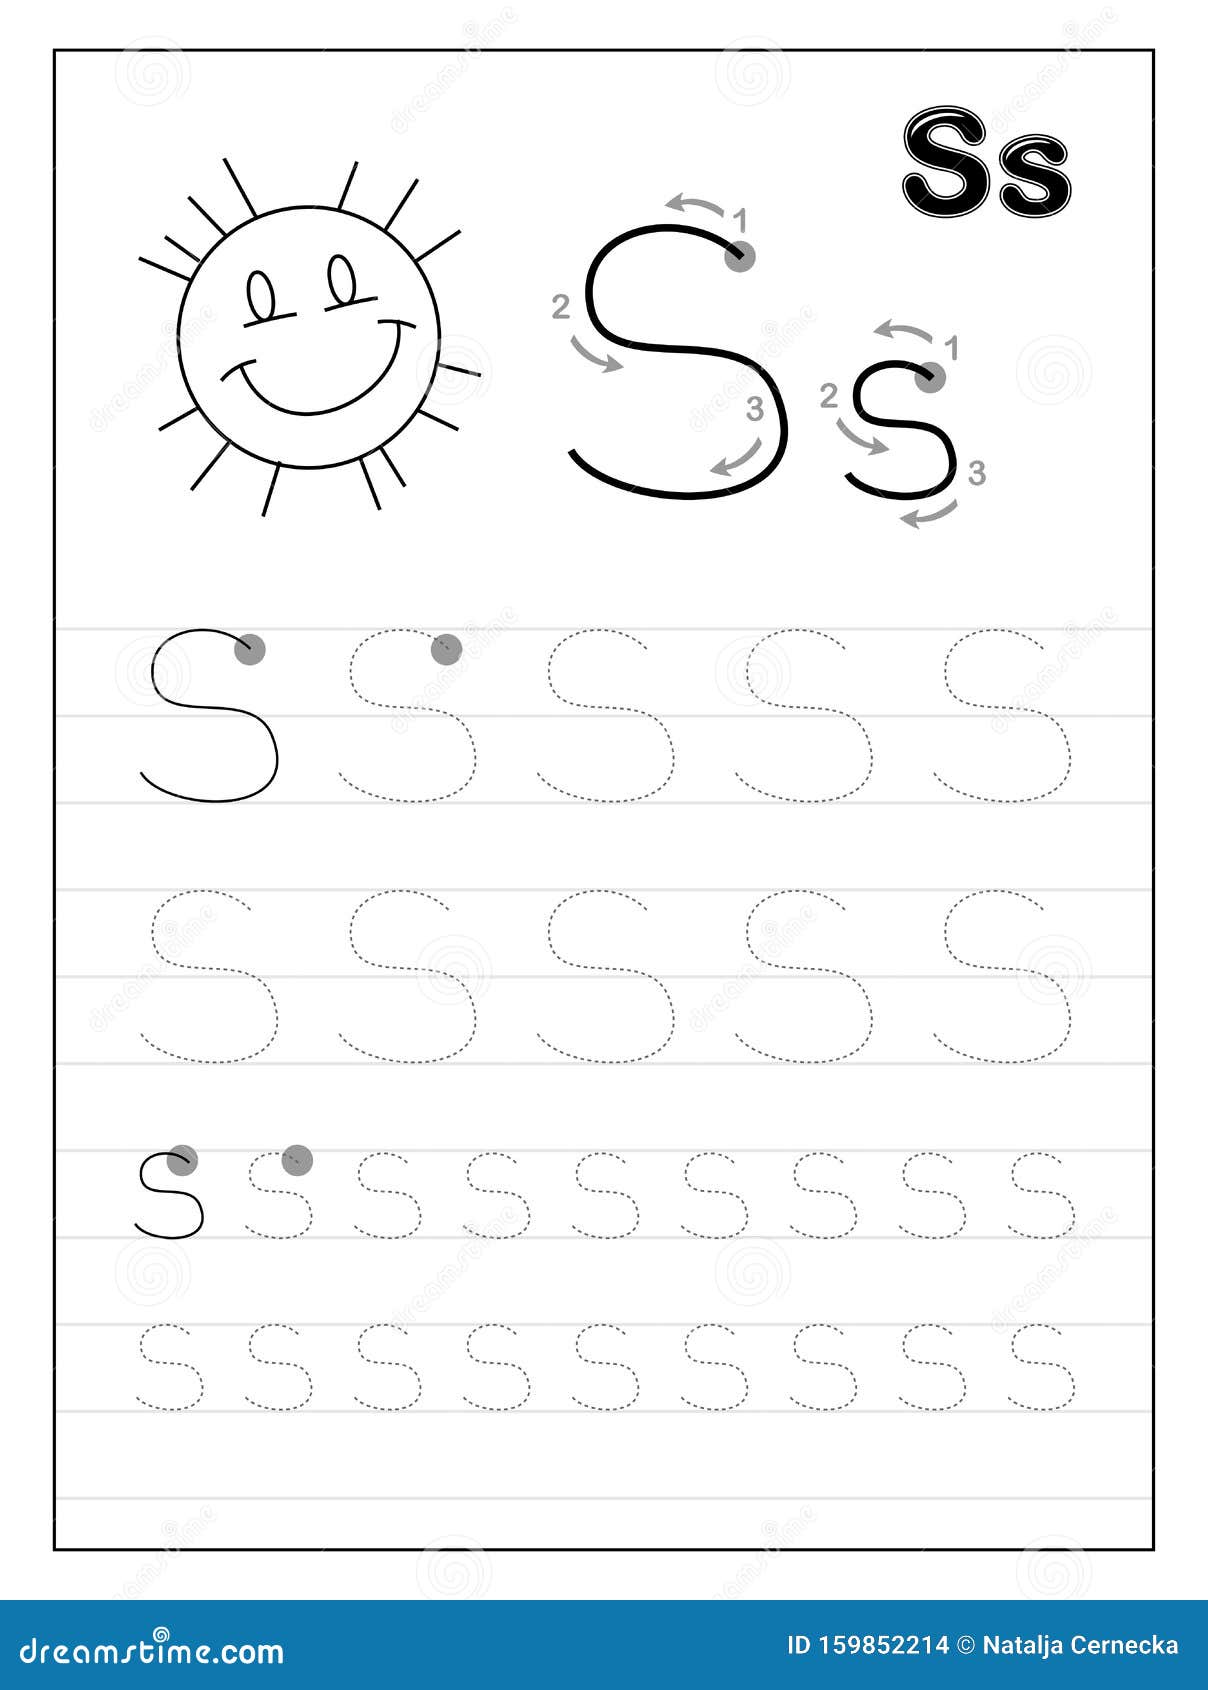 tracing-alphabet-letter-s-black-and-white-educational-pages-on-line-for-kids-printable